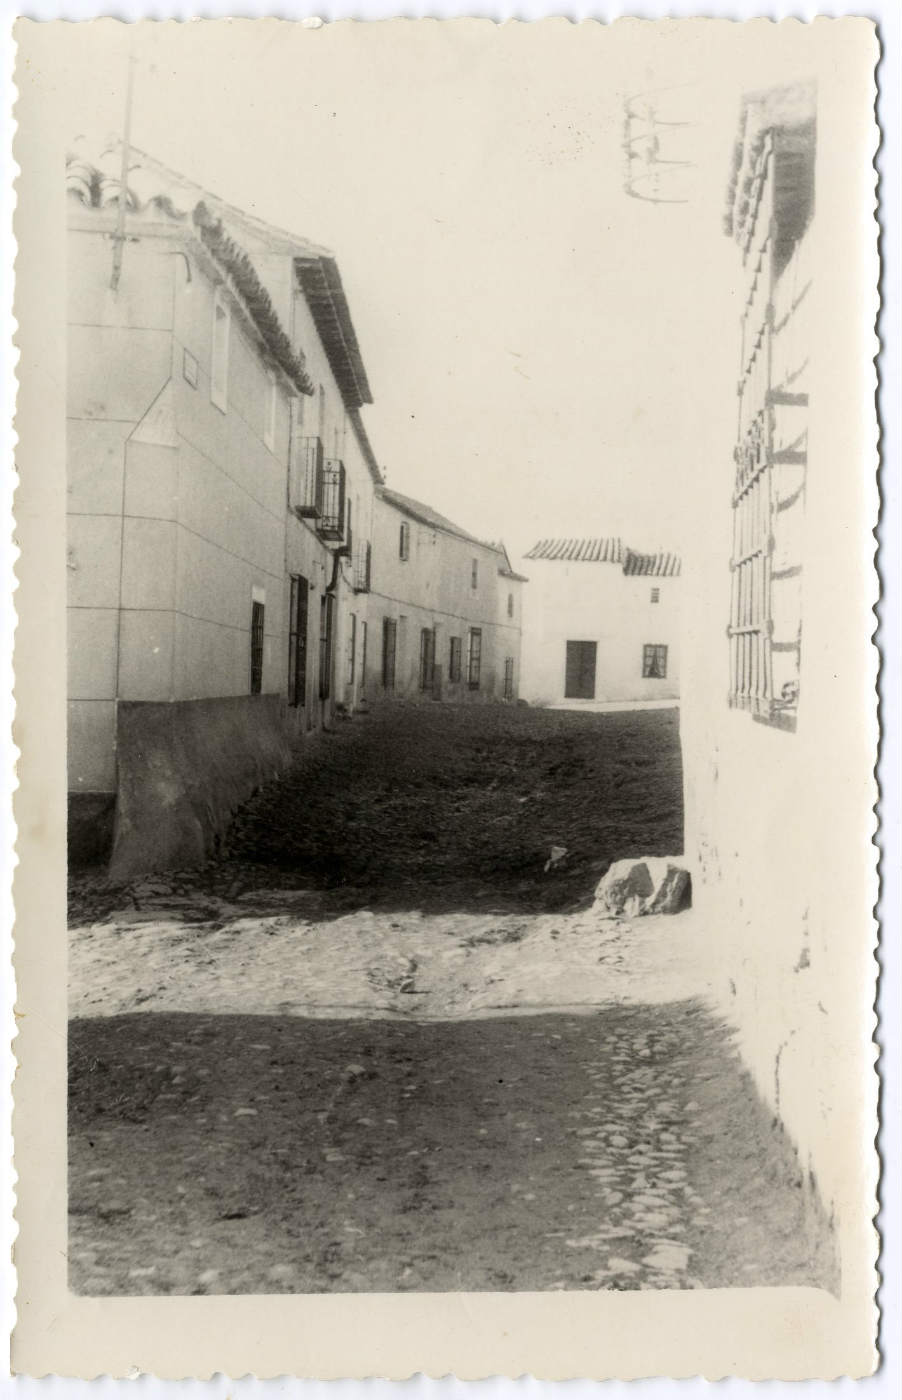 Marjaliza. Calle Real. 1959 (P-2683)